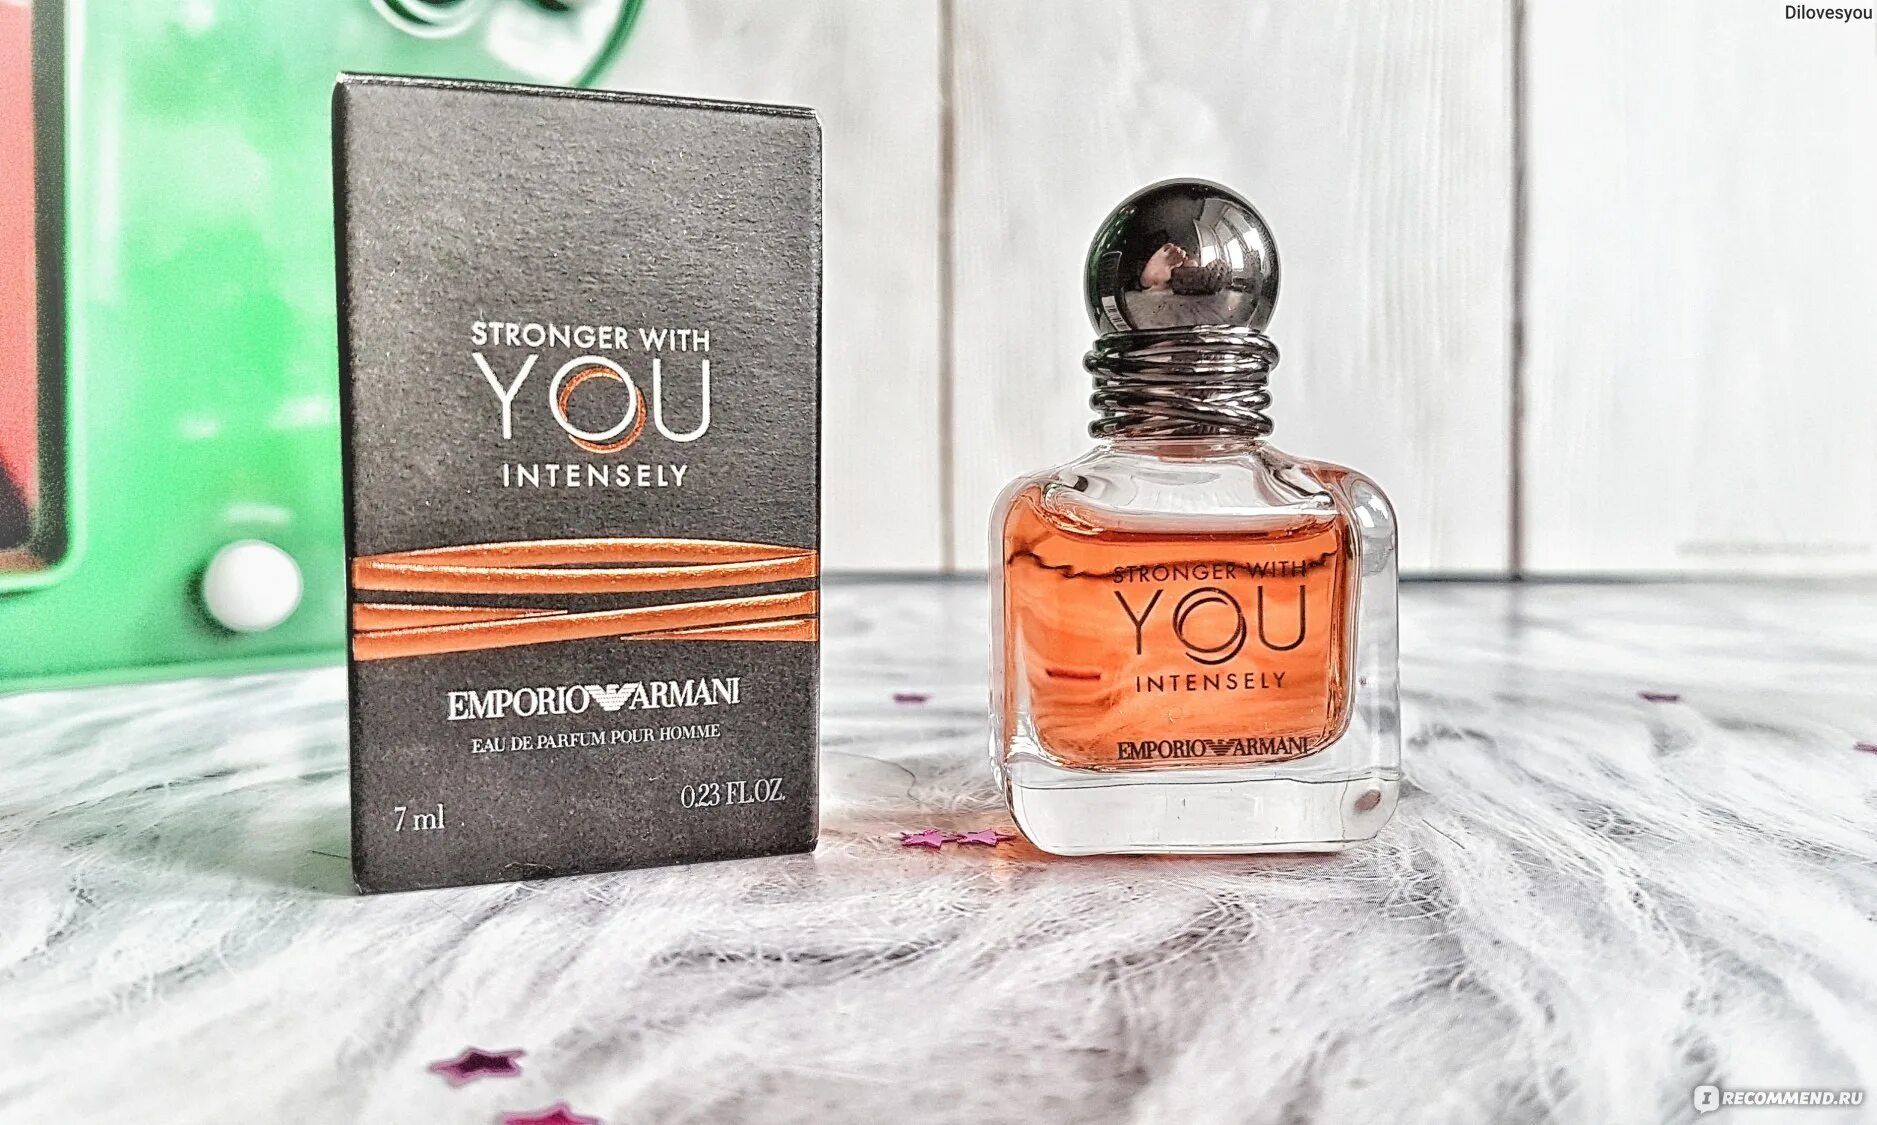 Stronger with you only. Emporio Armani stronger with you 50 ml. Giorgio Armani stronger with you intensely 100мл Парфюм. Emporio Armani stronger with you intensely 60 мл. Emporio Armani stronger with you intensely.